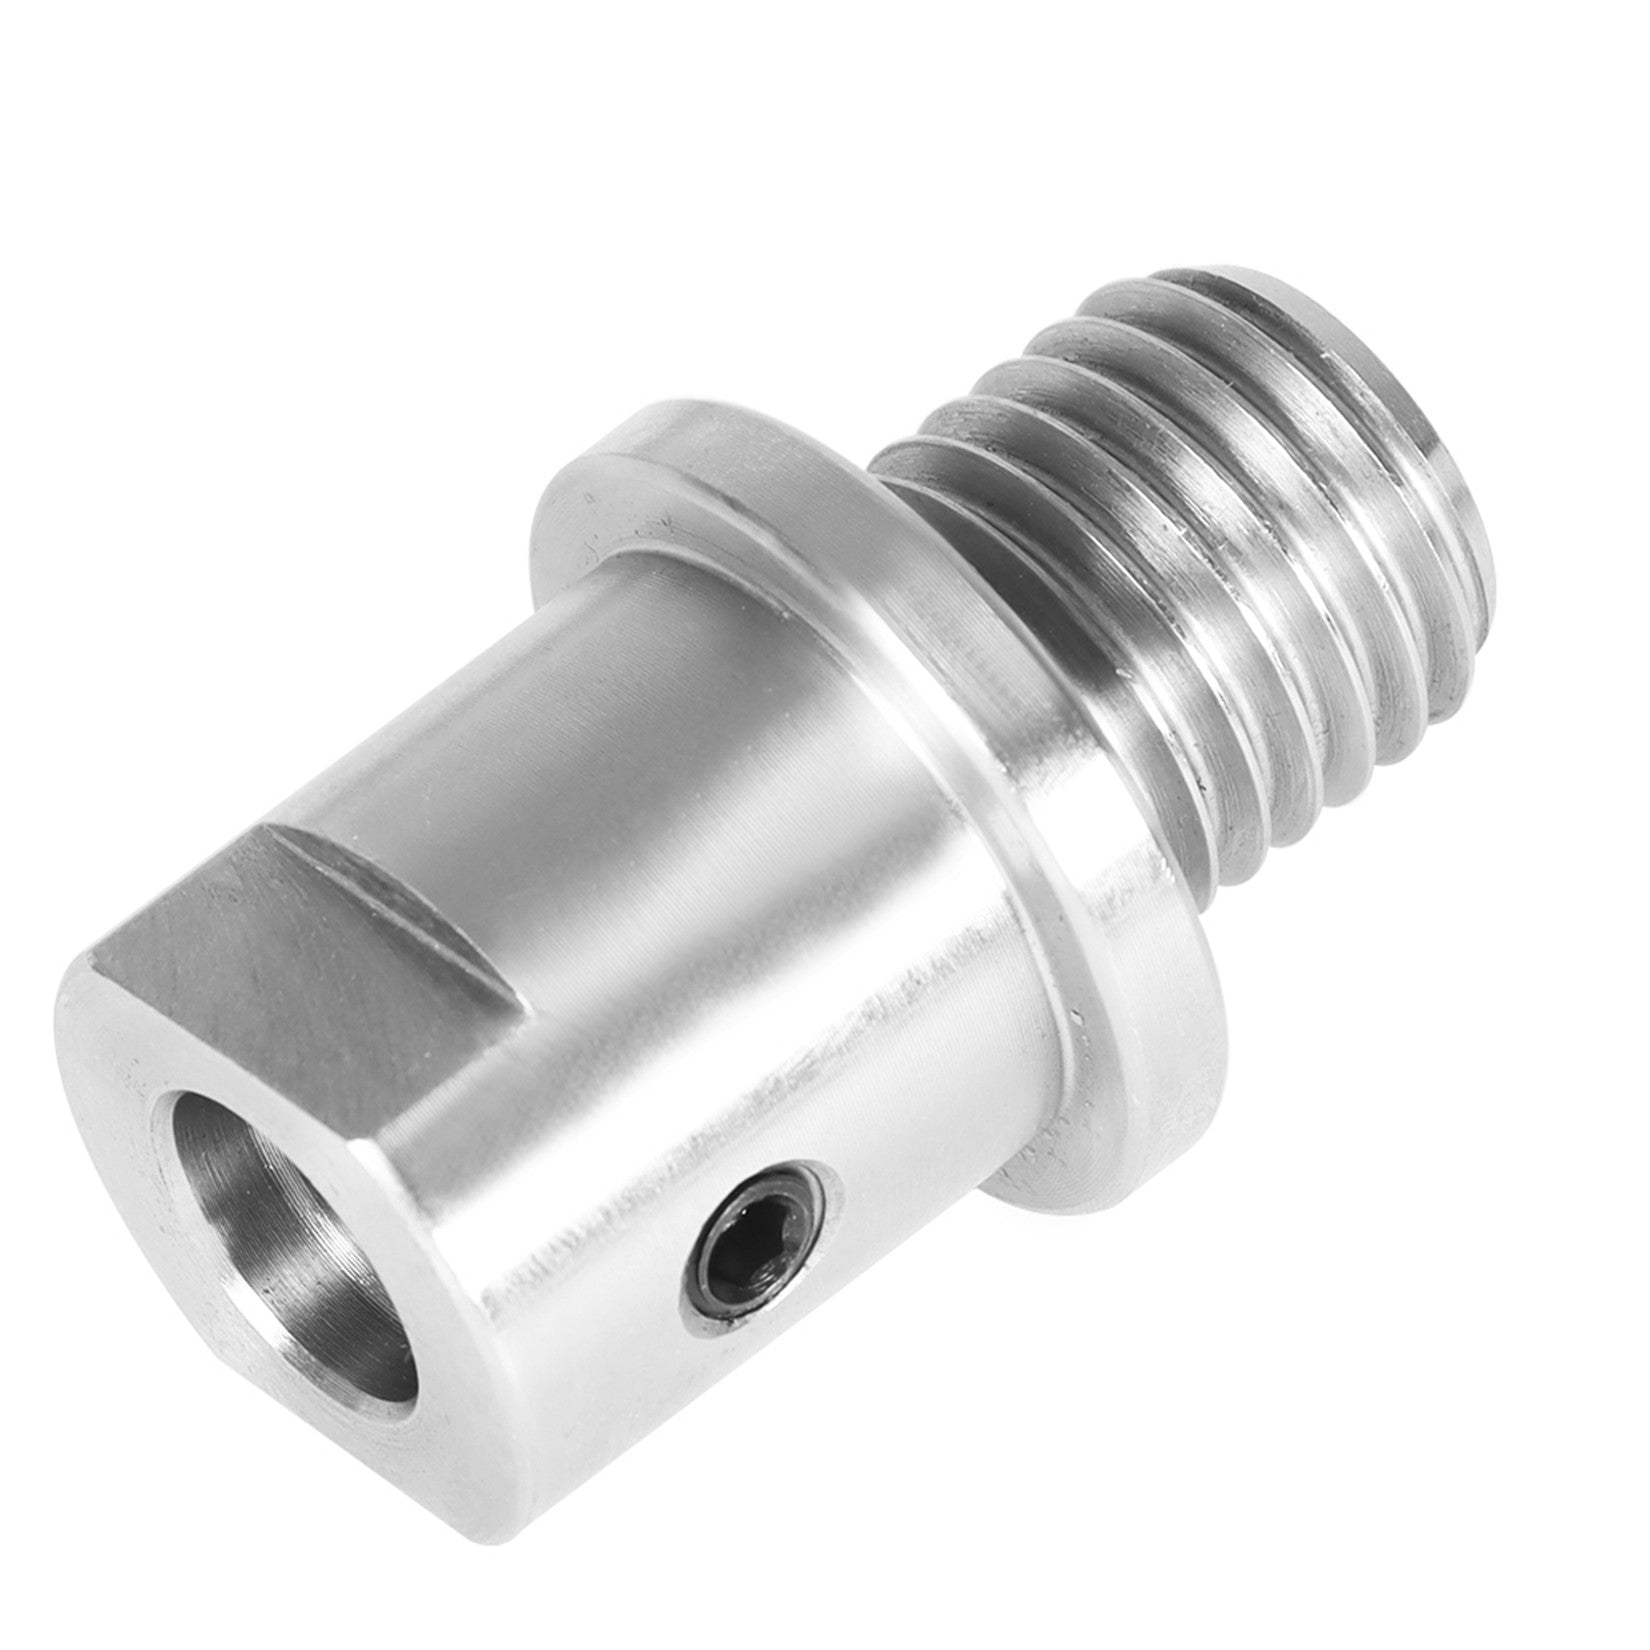 findmall Lathe Headstock Spindle Adapter Converts 5/8 Inch Shopsmith to 1 Inch x 8TPI for Woodworking Lathe FINDMALLPARTS